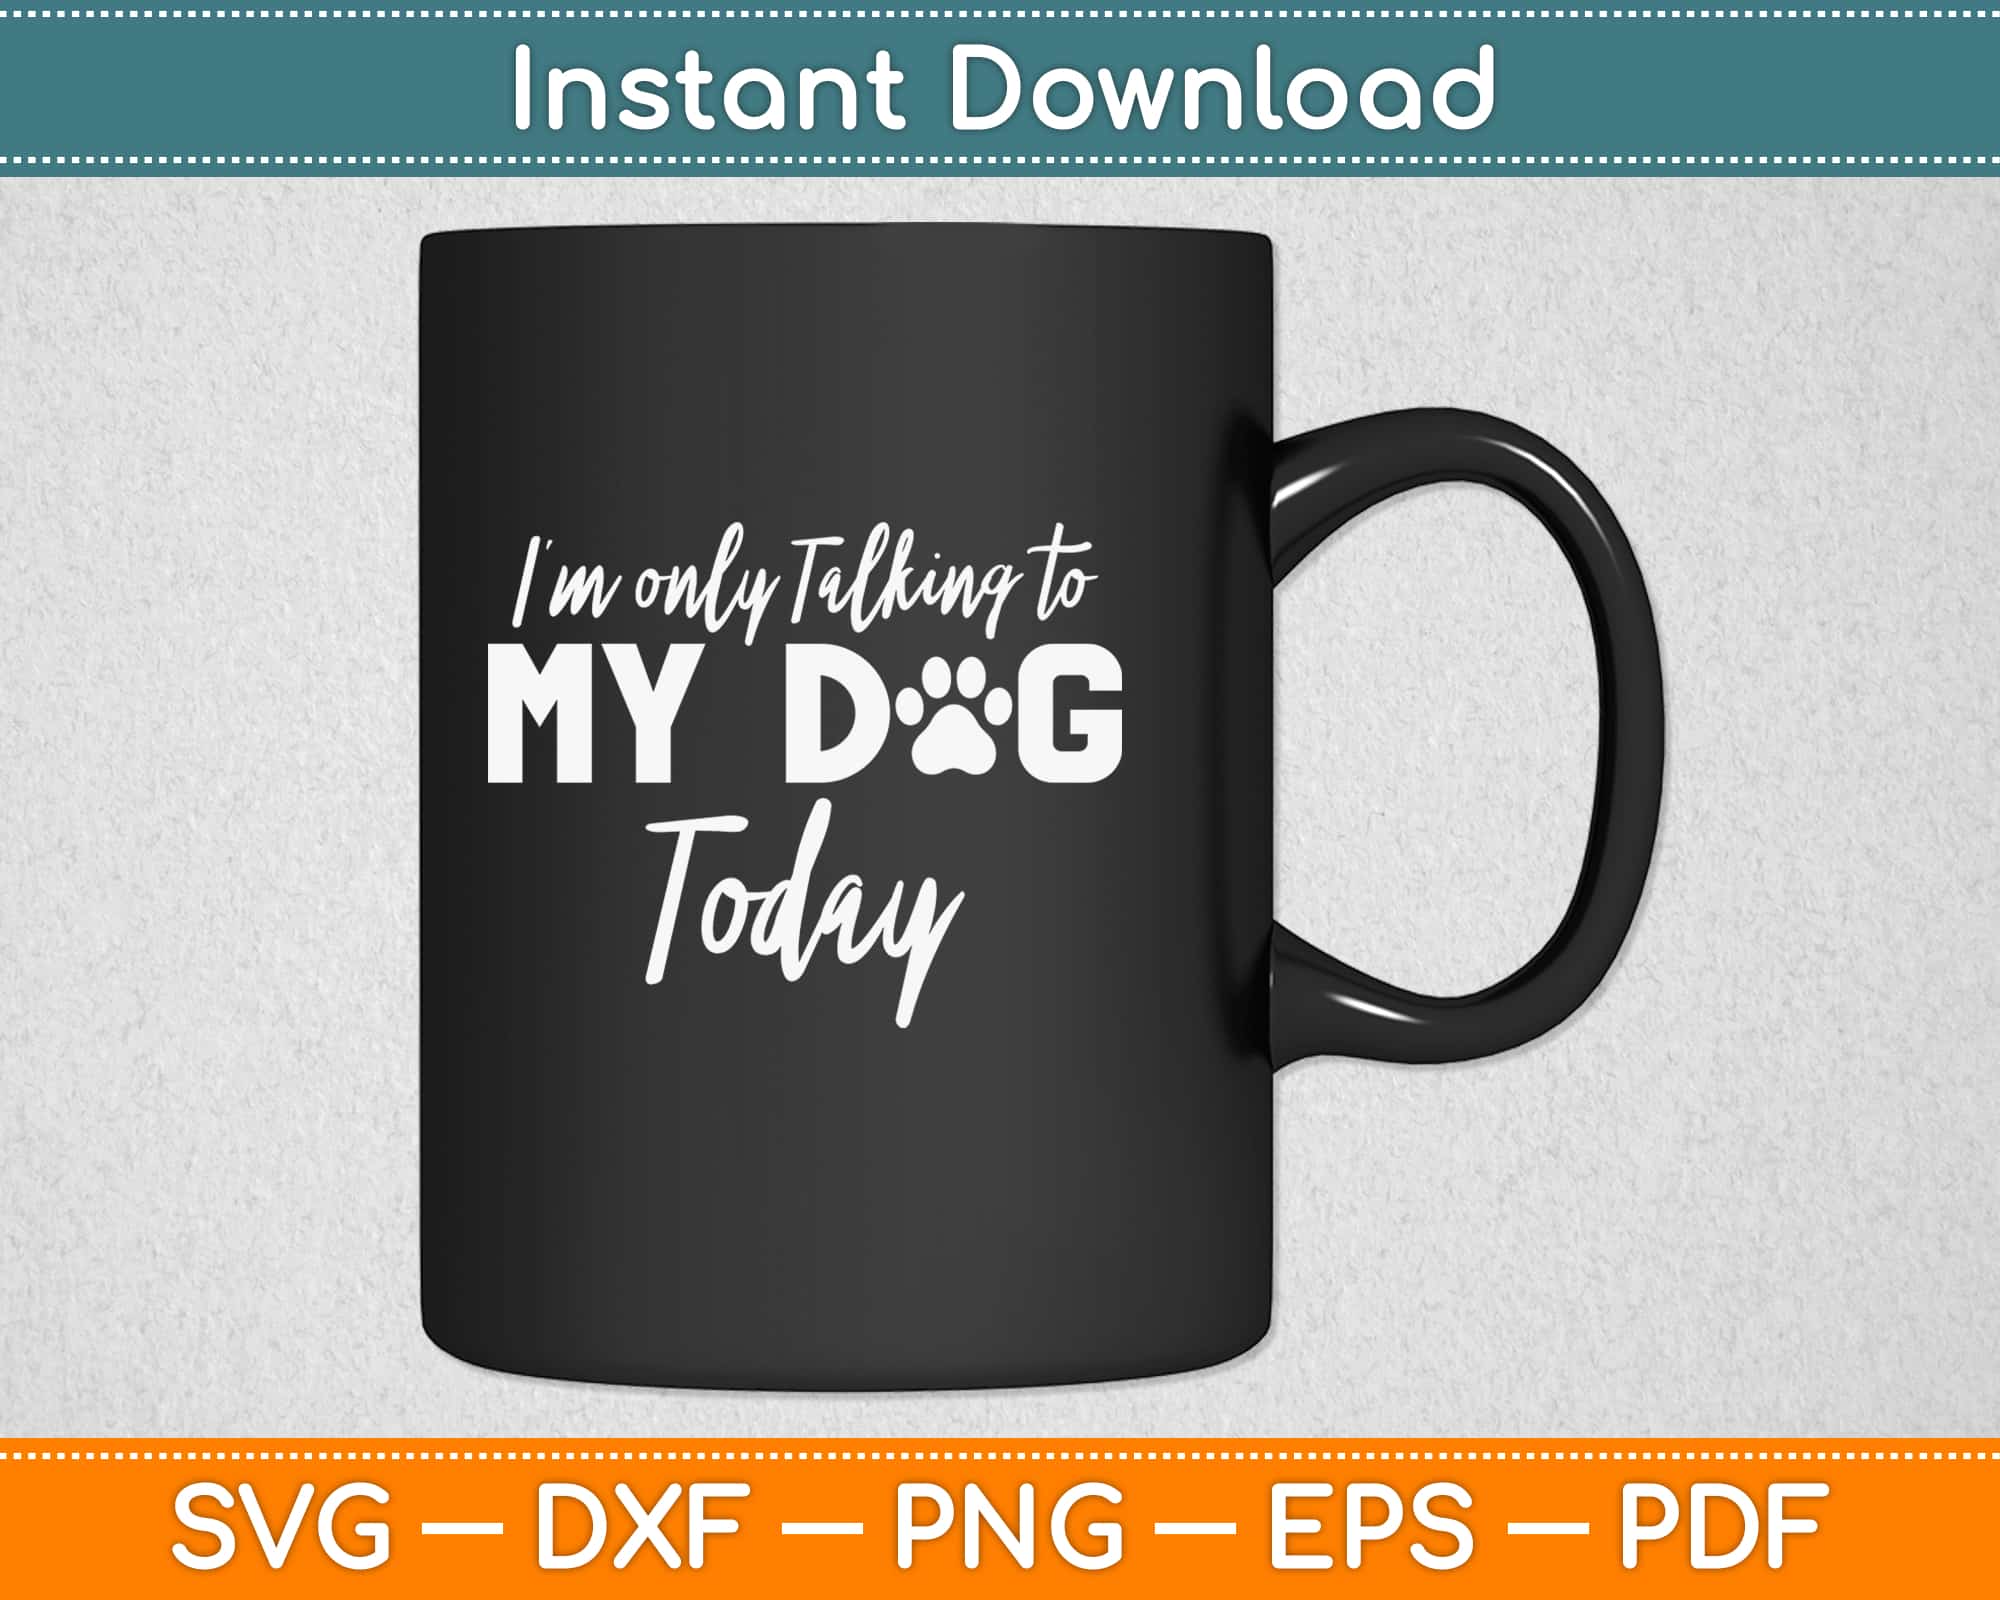 I'm Only Talking To My Dog Today Svg Digital Download – artprintfile